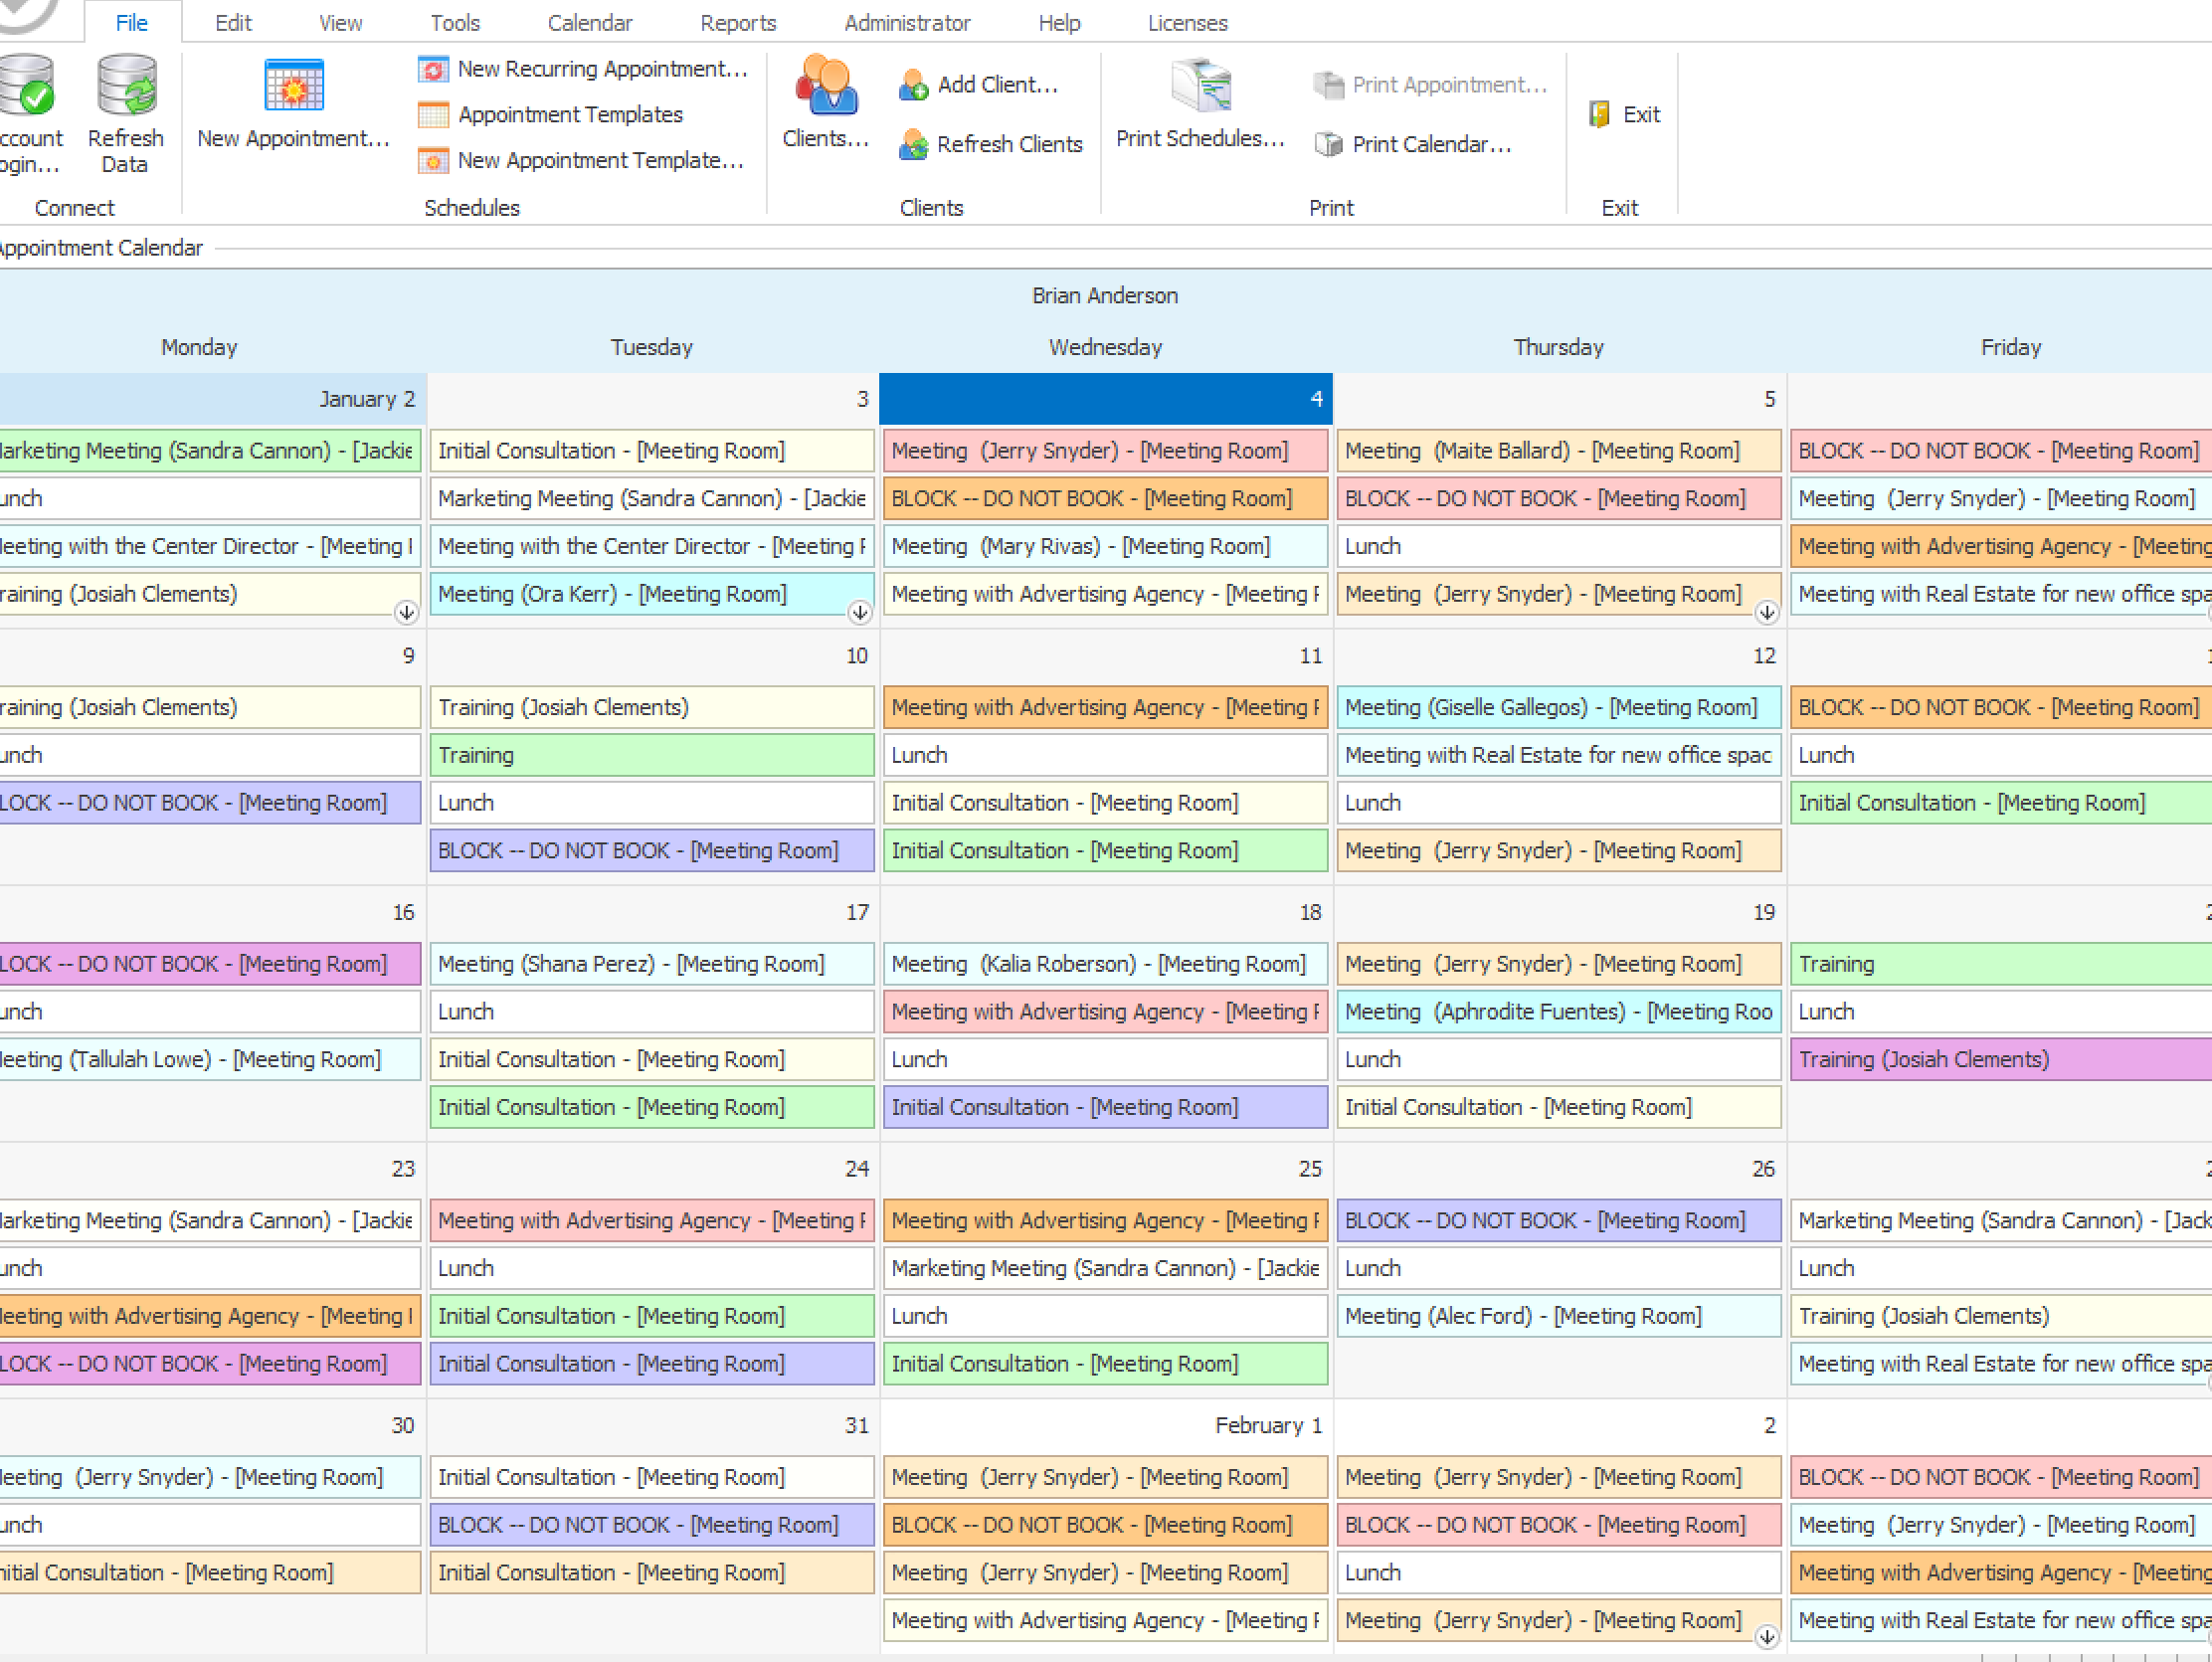 ScheduFlow Software - View multiple schedules side by side